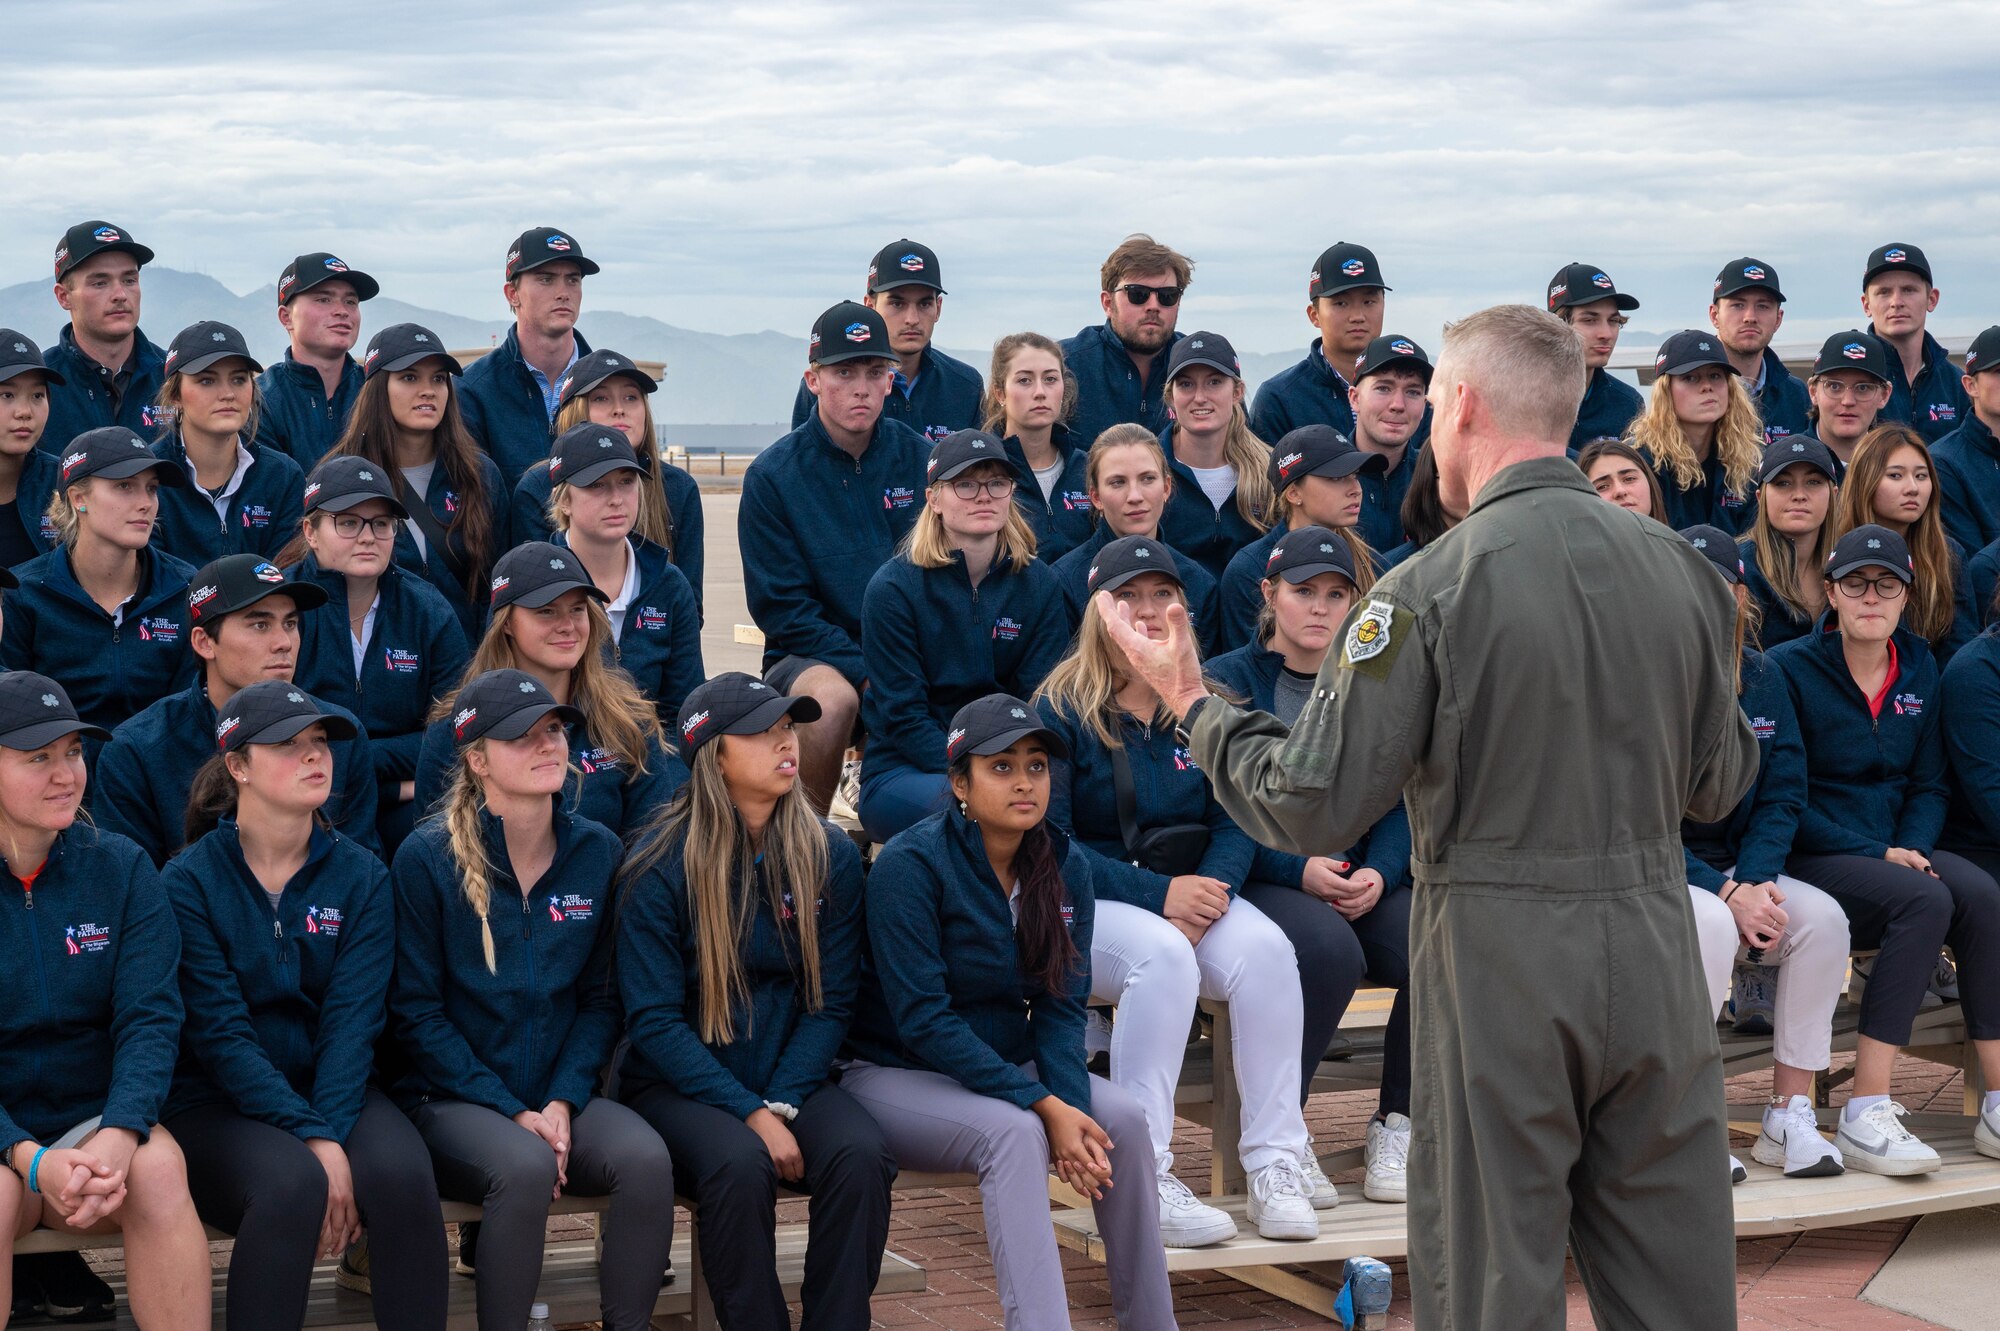 U.S. Air Force Brig. Gen. Jason Rueschhoff, 56th Fighter Wing commander, speaks to participants of the Patriot All-American golf tournament during a base visit, Dec. 27, 2022, at Luke Air Force Base, Arizona.